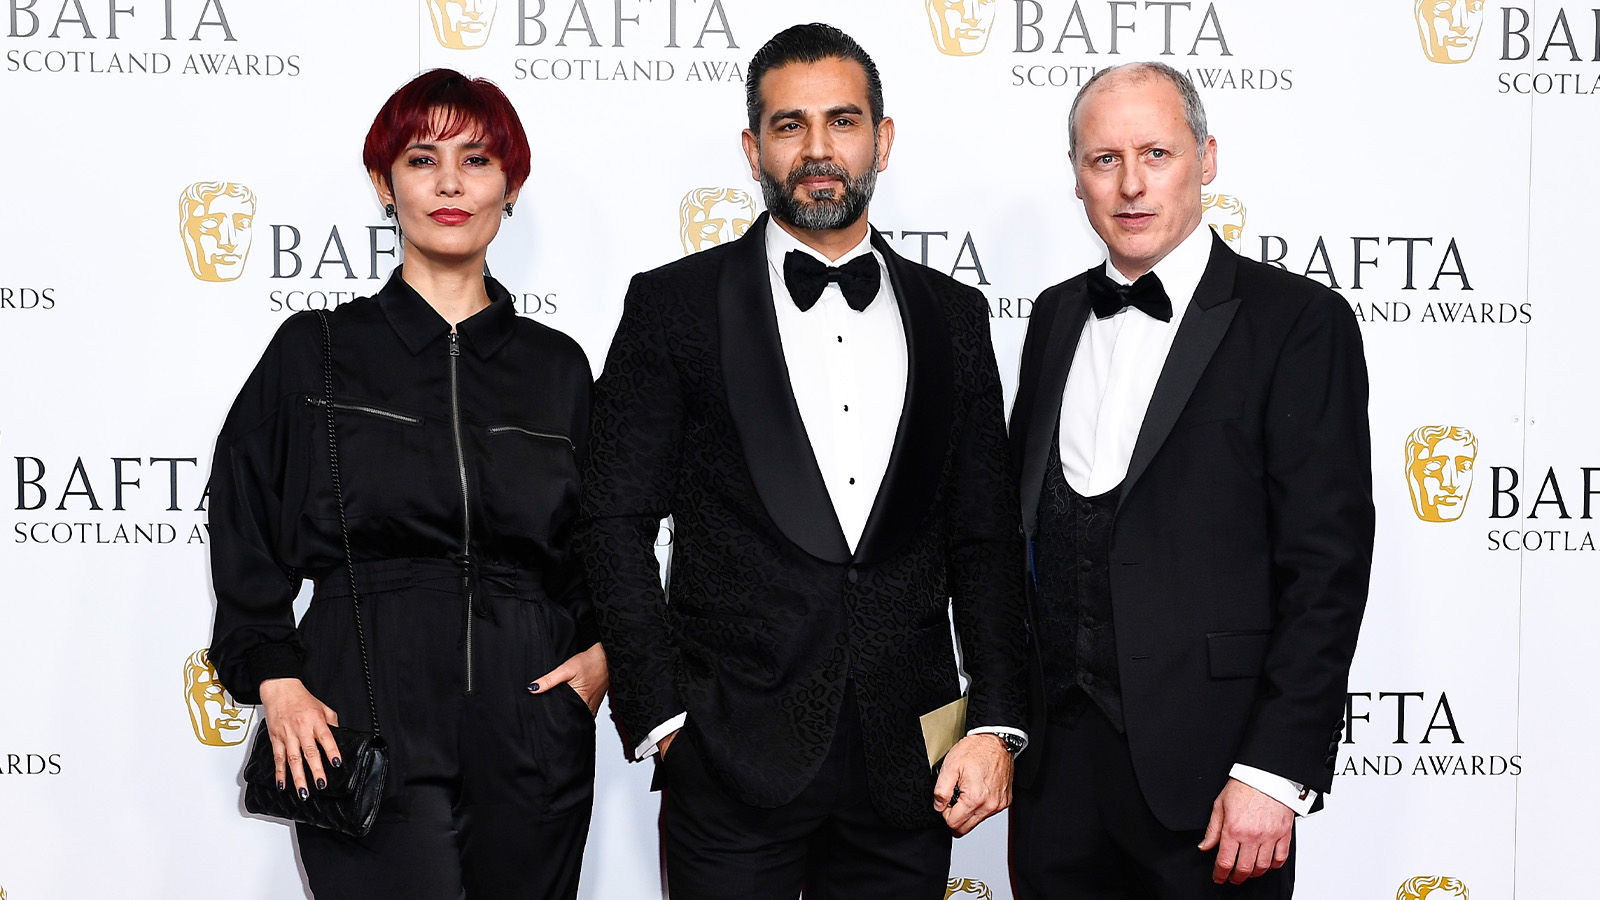 GLASGOW, SCOTLAND - NOVEMBER 19: Hassan Nazer (C) attends the 2023 BAFTA Scotland Awards held at the DoubleTree by Hilton Glasgow Central on November 19, 2023 in Glasgow, Scotland. (Photo by Euan Cherry/BAFTA/Getty Images for BAFTA)